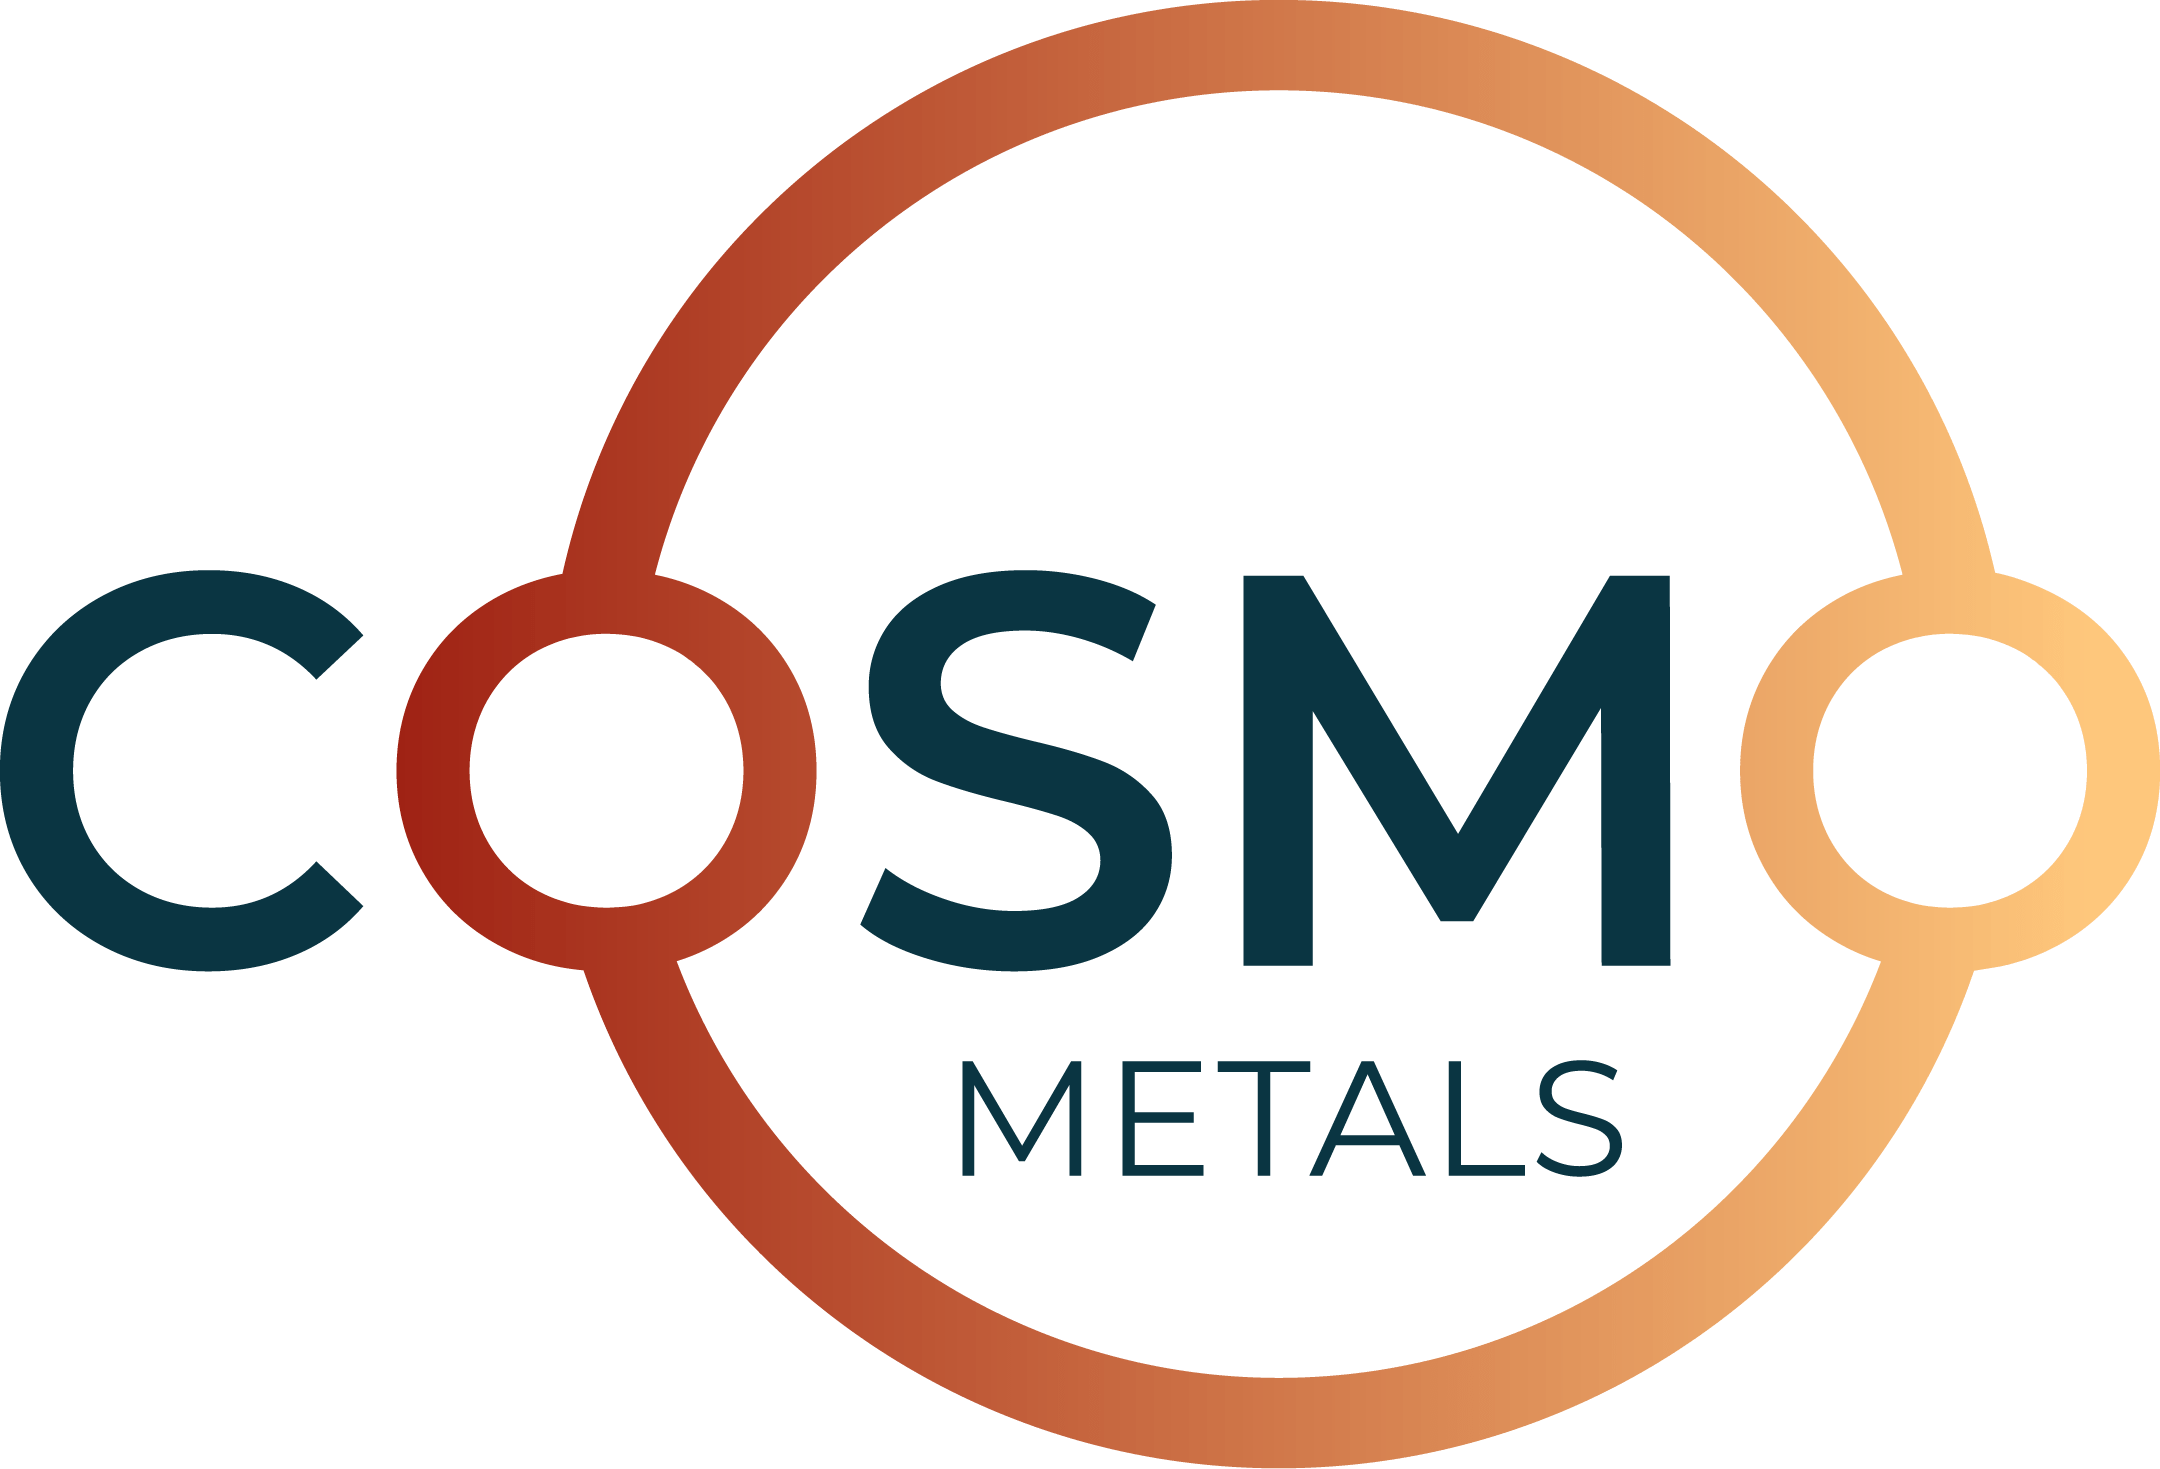 Cosmo Metals – CMO